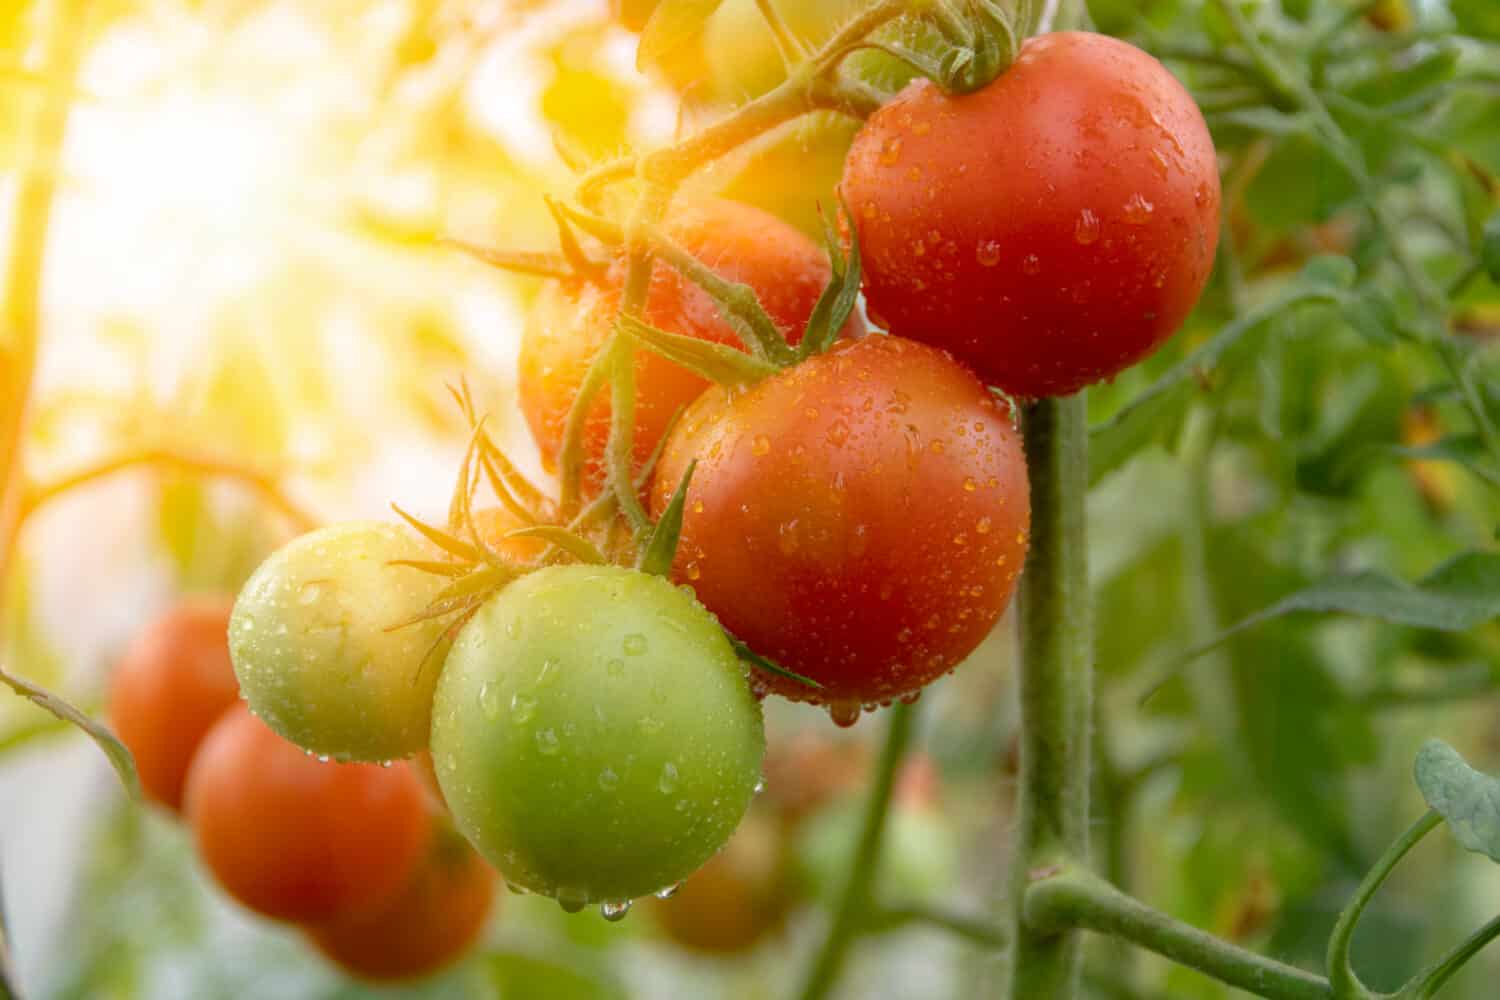 Providing Optimal Lighting and Temperature Conditions for Tomato Growth